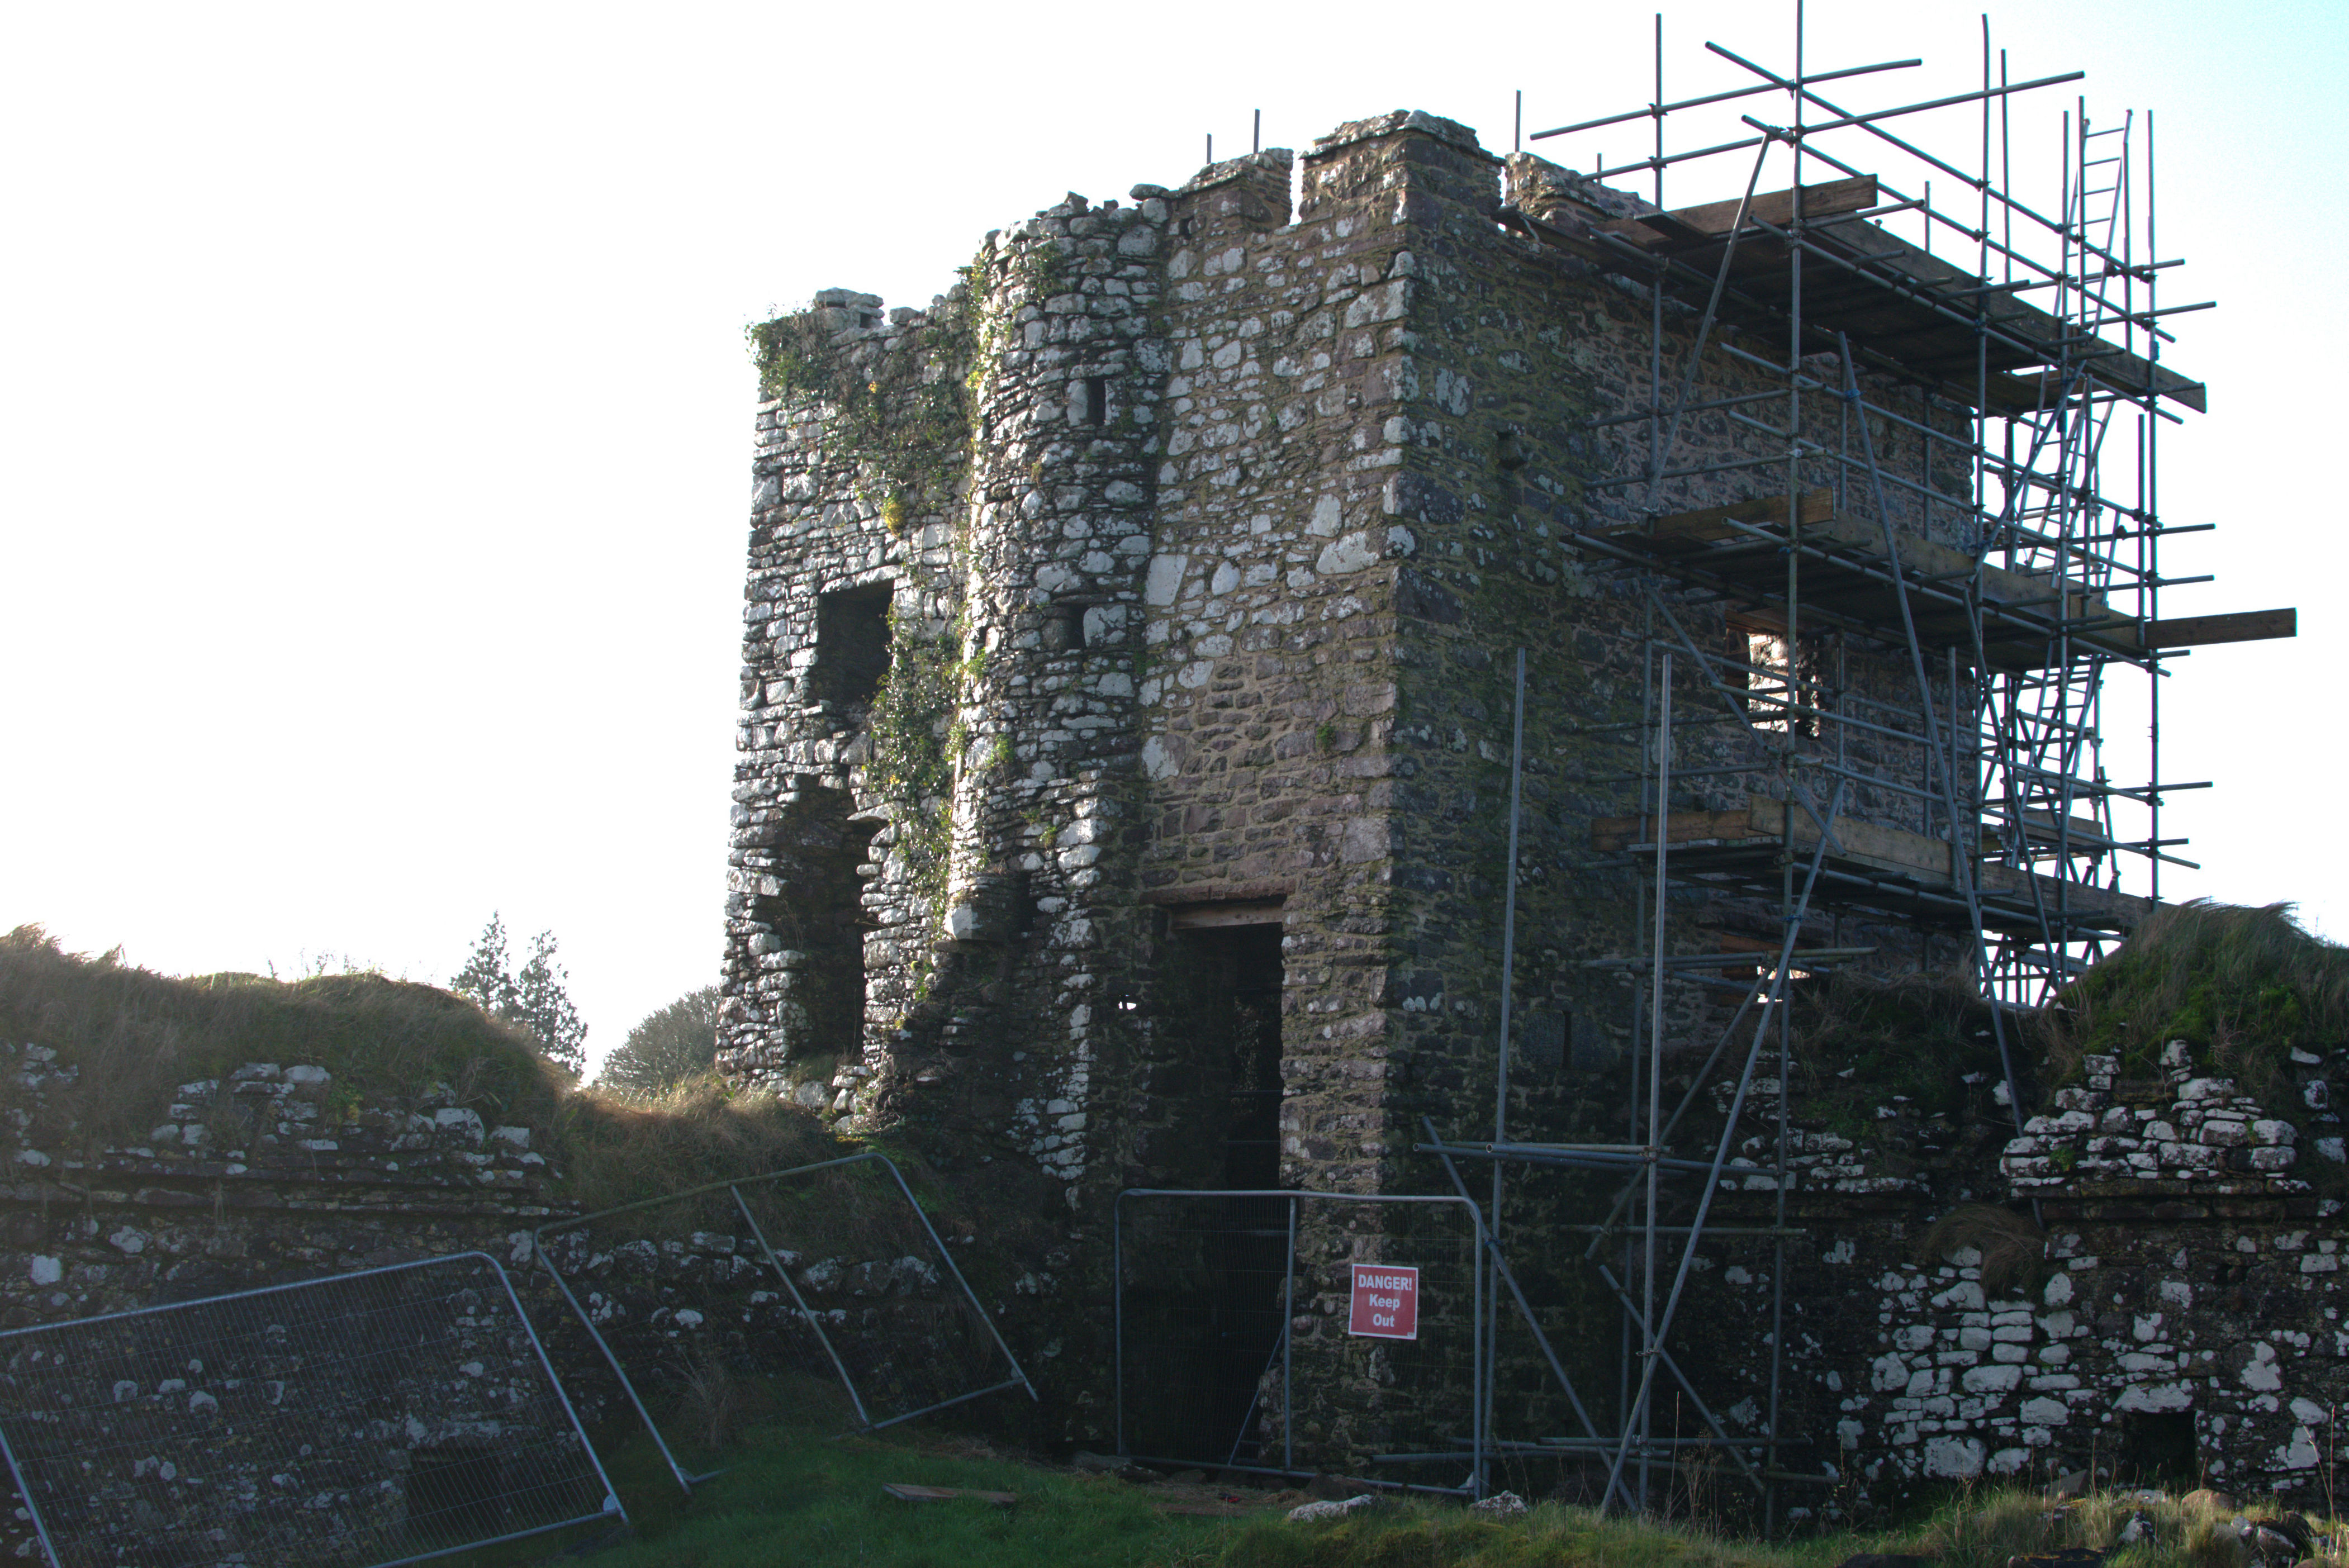 castle conservationists hope to inspire other communities